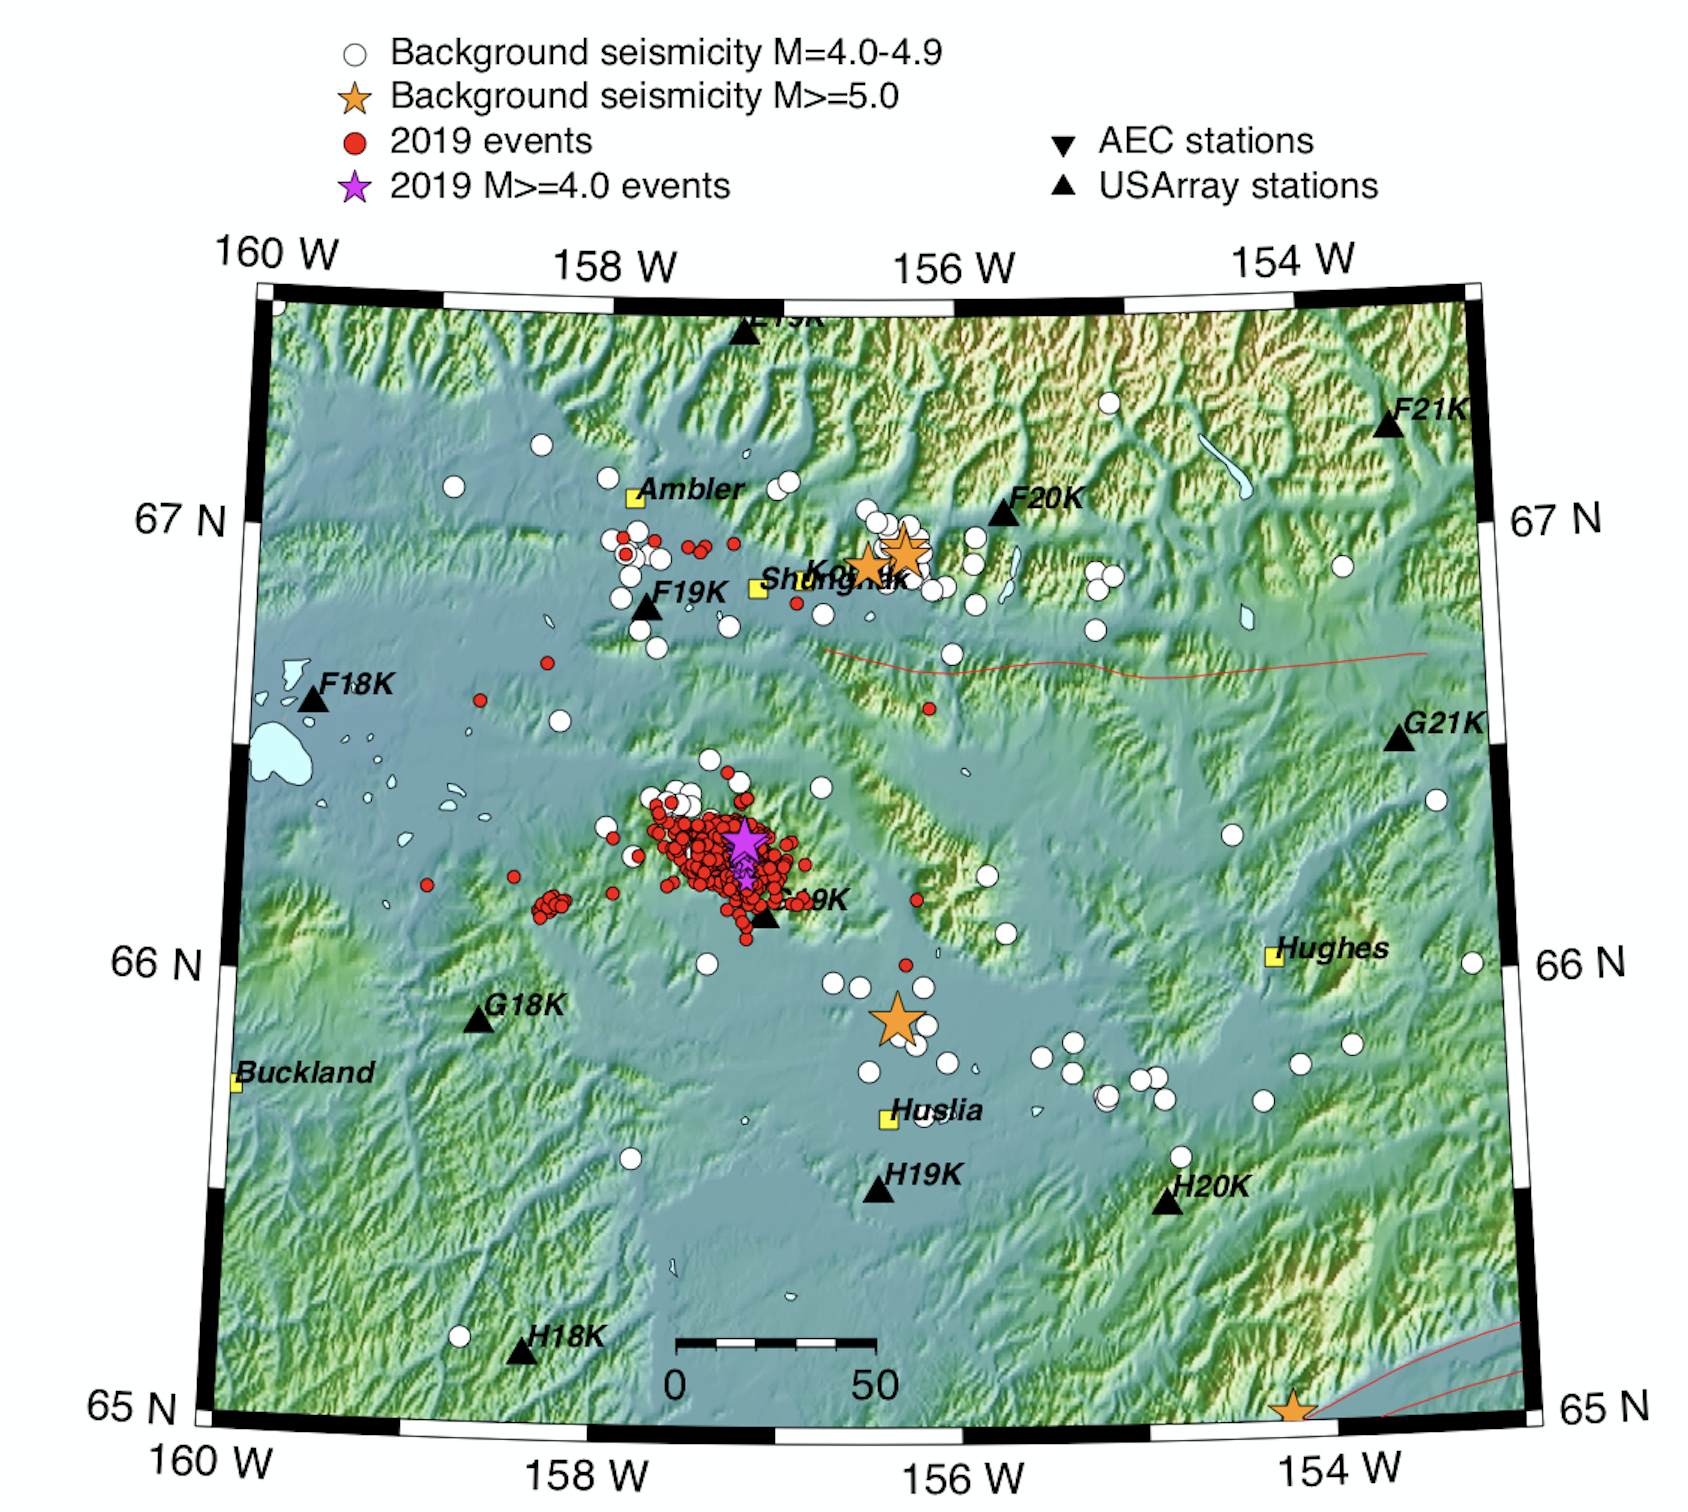 Map with cluster of 2019 earthquakes in center, with a few over magnitude 4. This is in contrast to more scattered background seismicity events. 